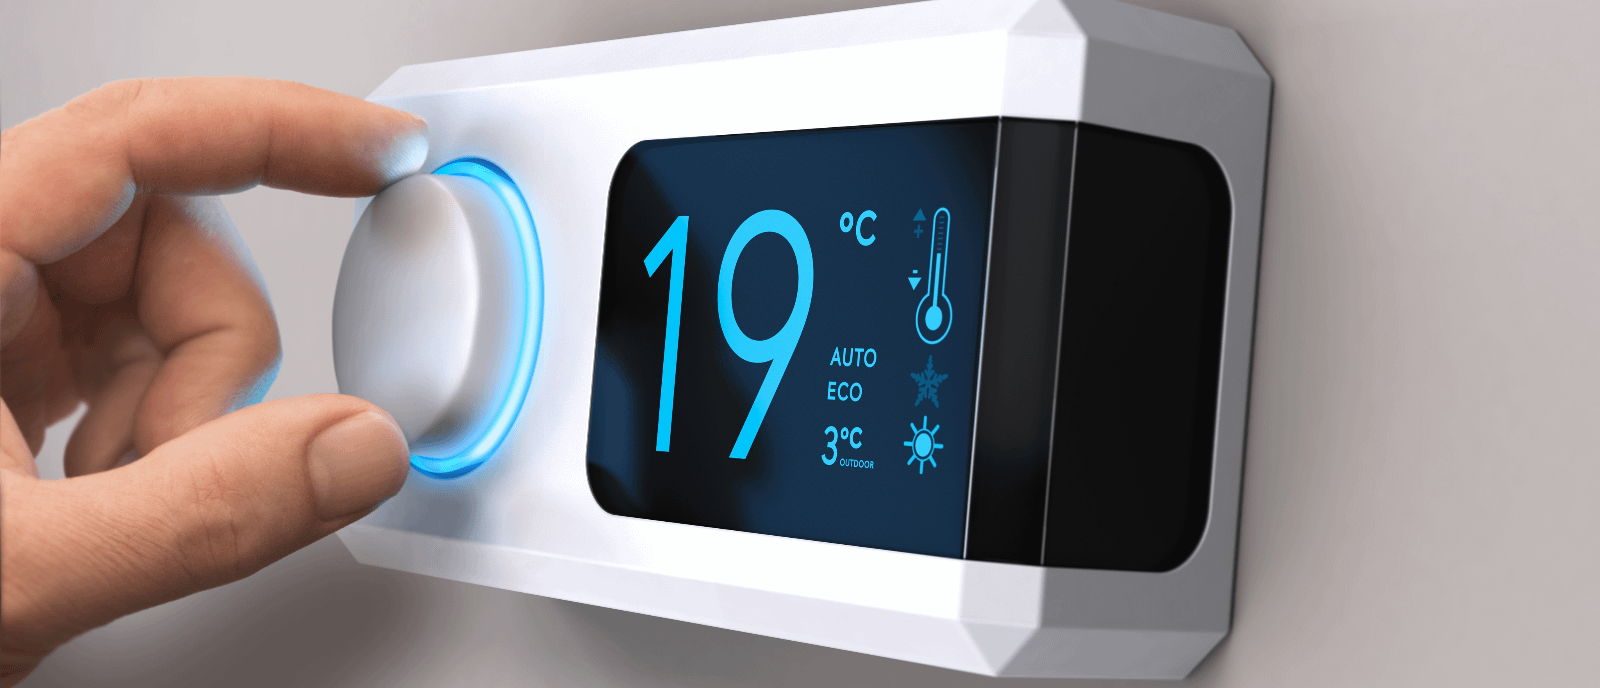 Person turning on thermostat set to 19 degrees Celsius